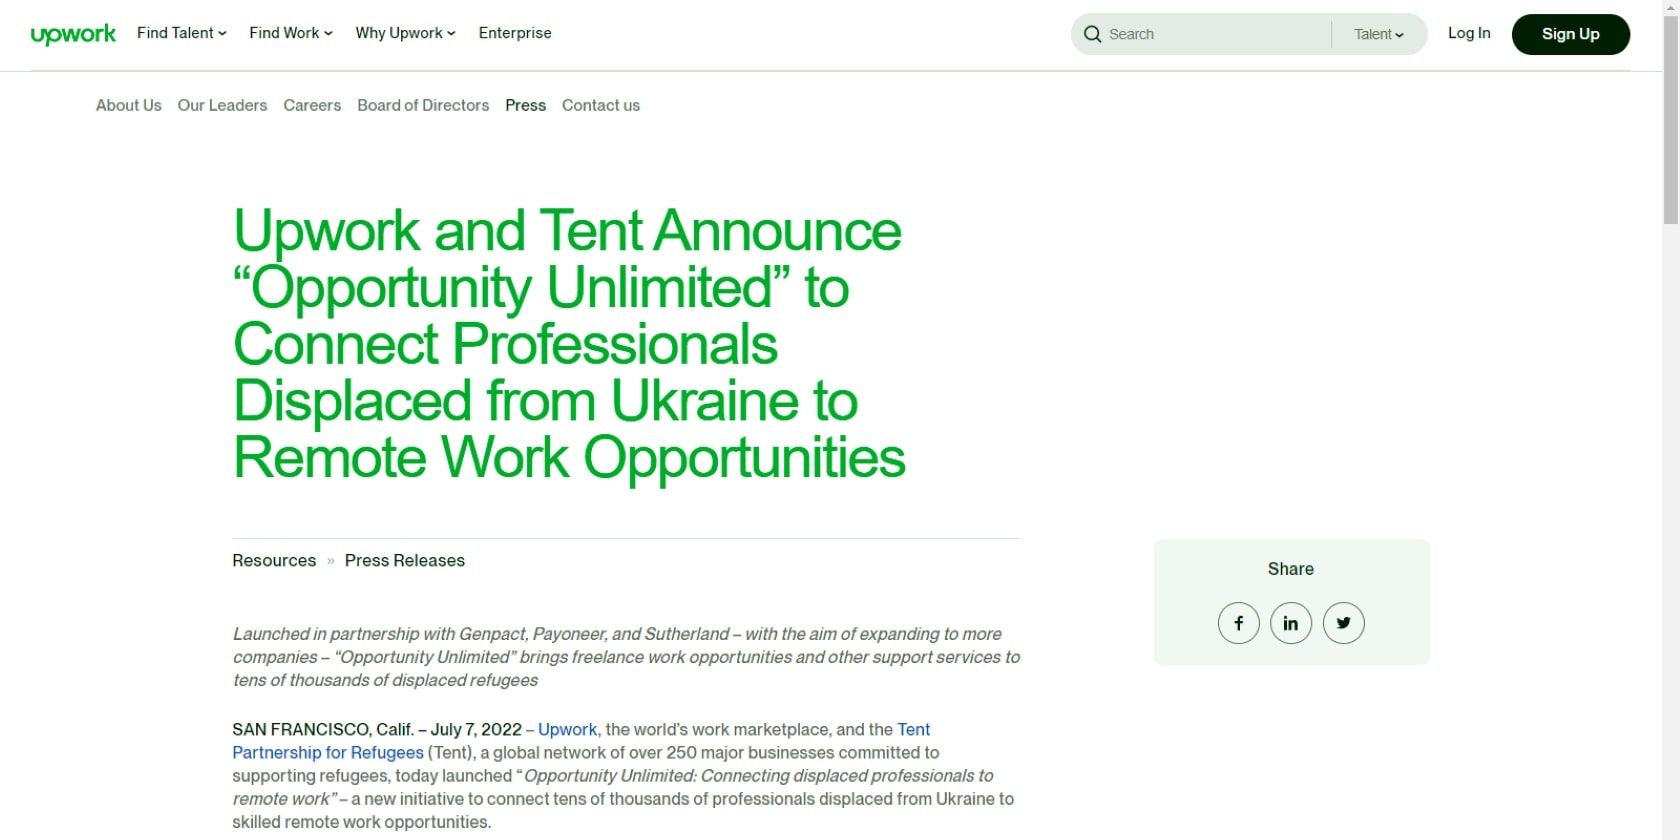 An image of Upwork's press release announcing the initiative